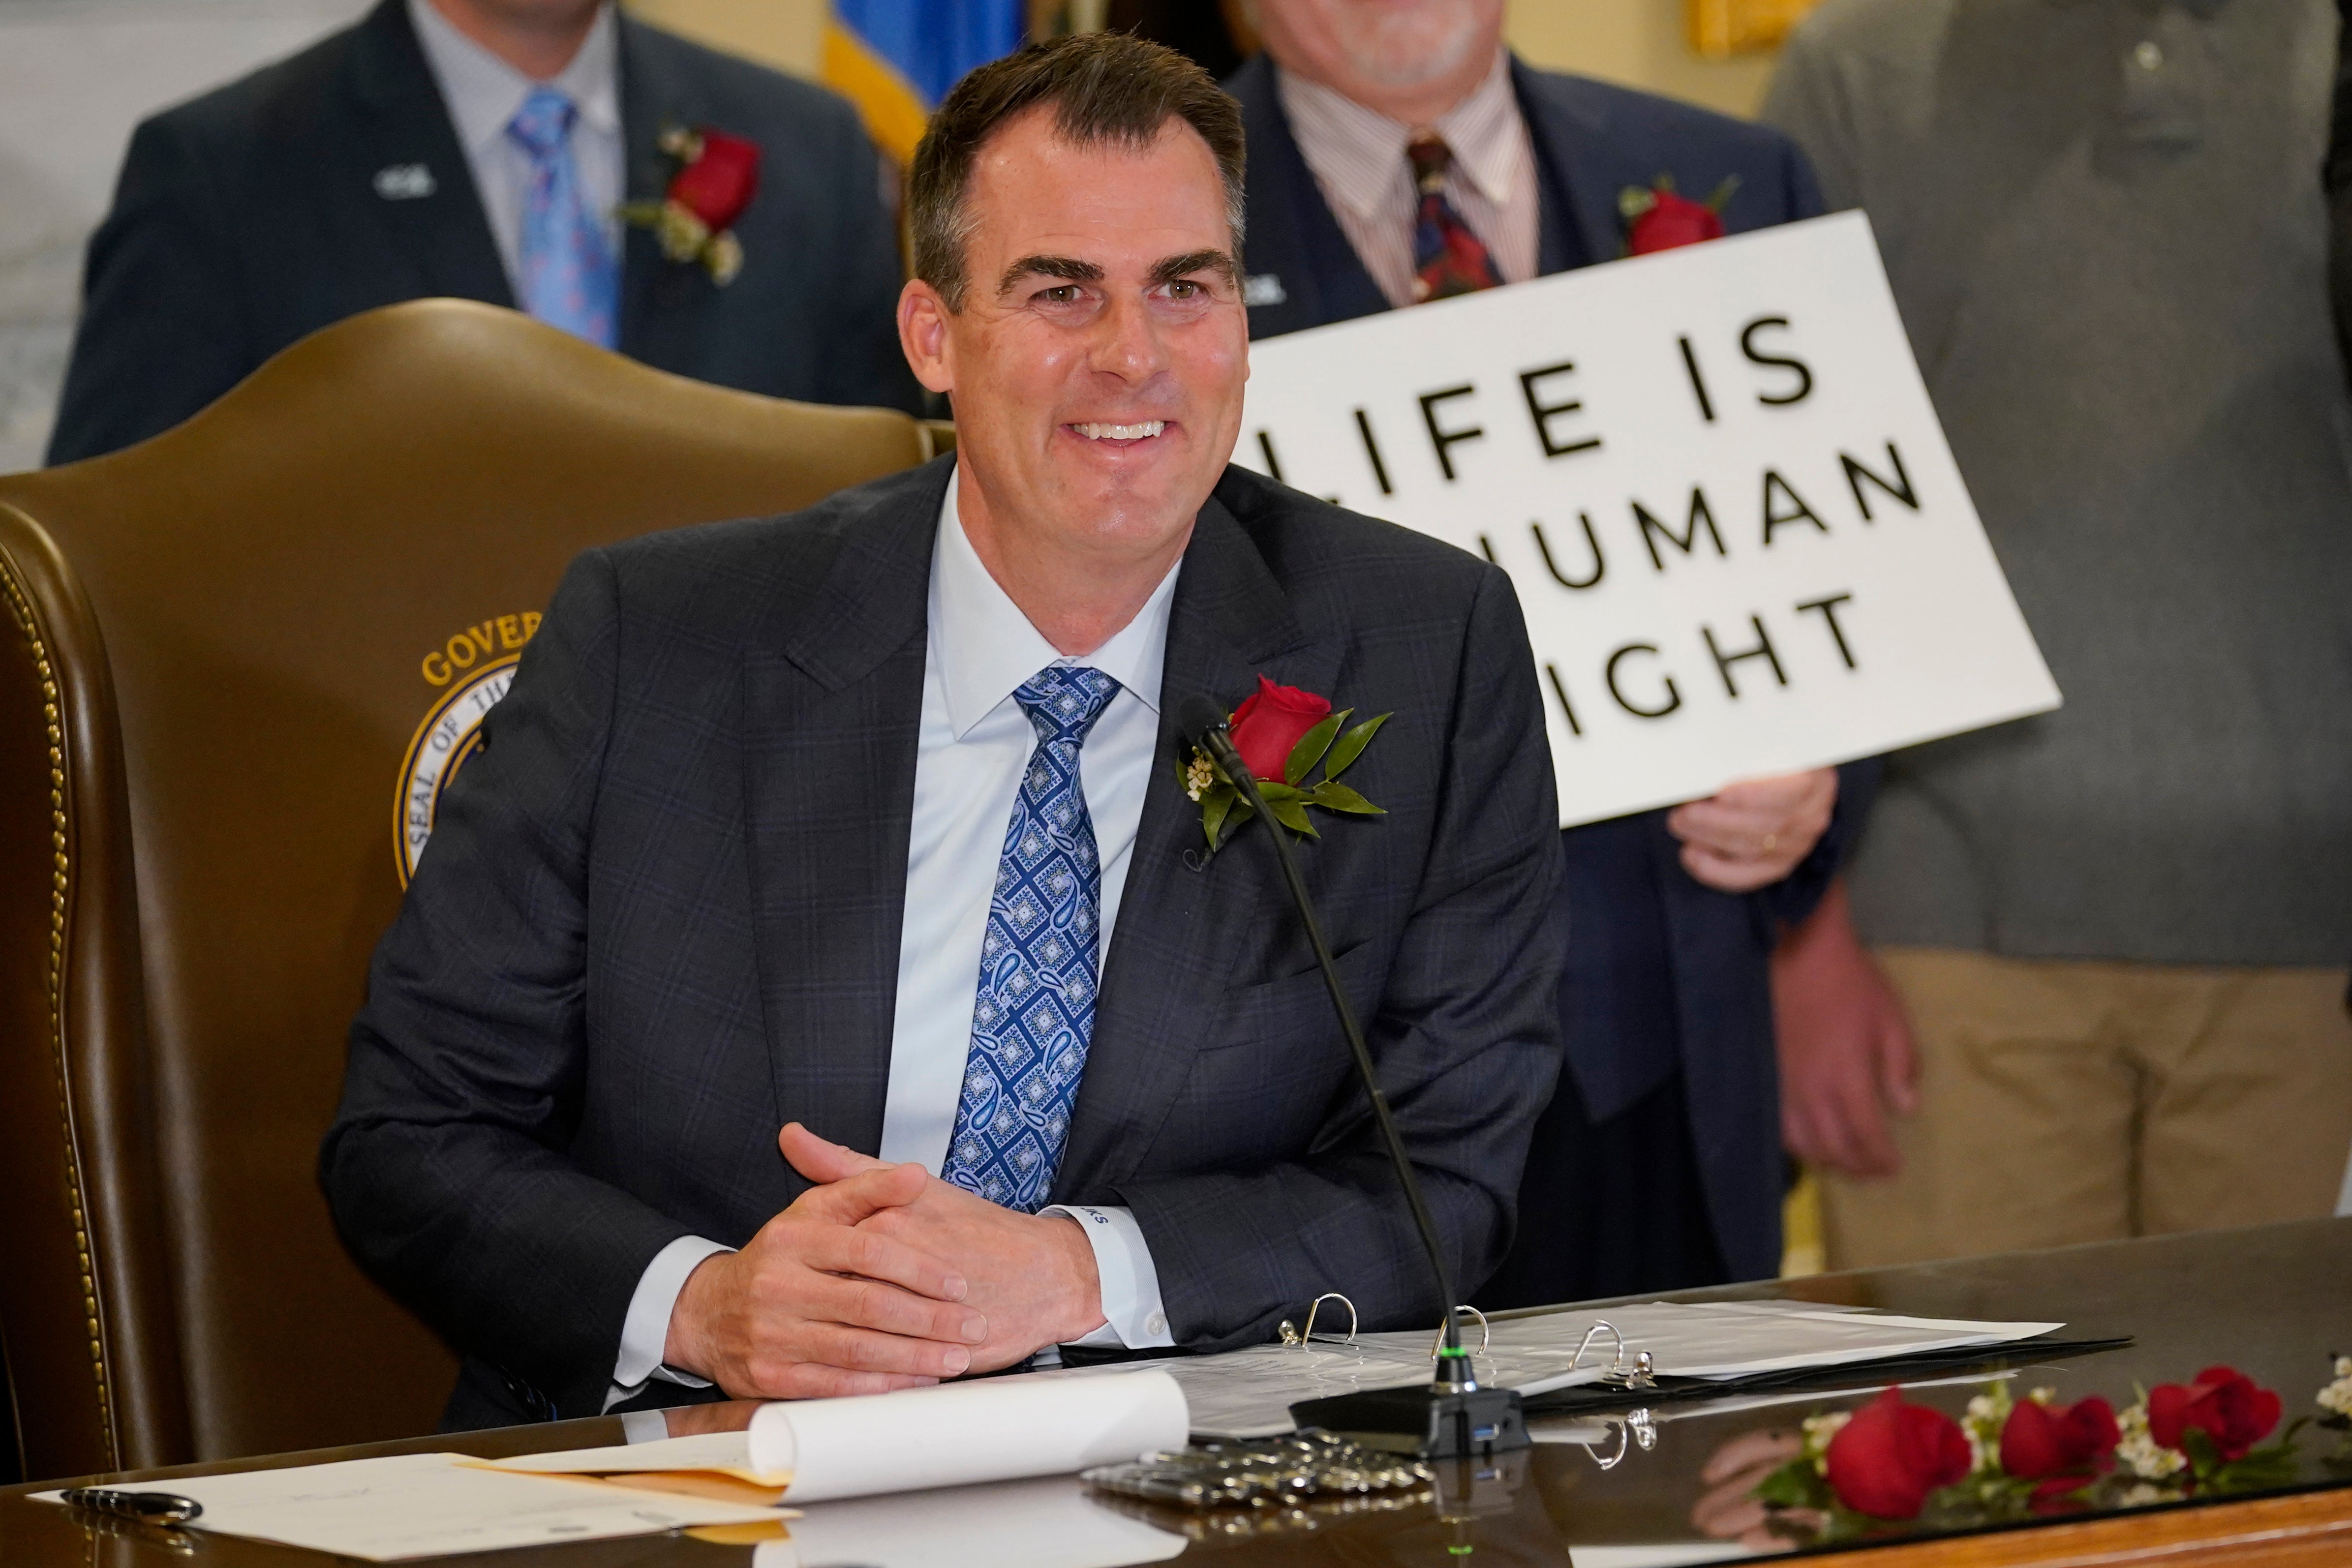 Oklahoma Governor Kevin Stitt has pledged to ‘outlaw abortion’ in the state despite constitutional protections affirmed by Roe v Wade, which abortion rights advocates are preparing to see come to an end.